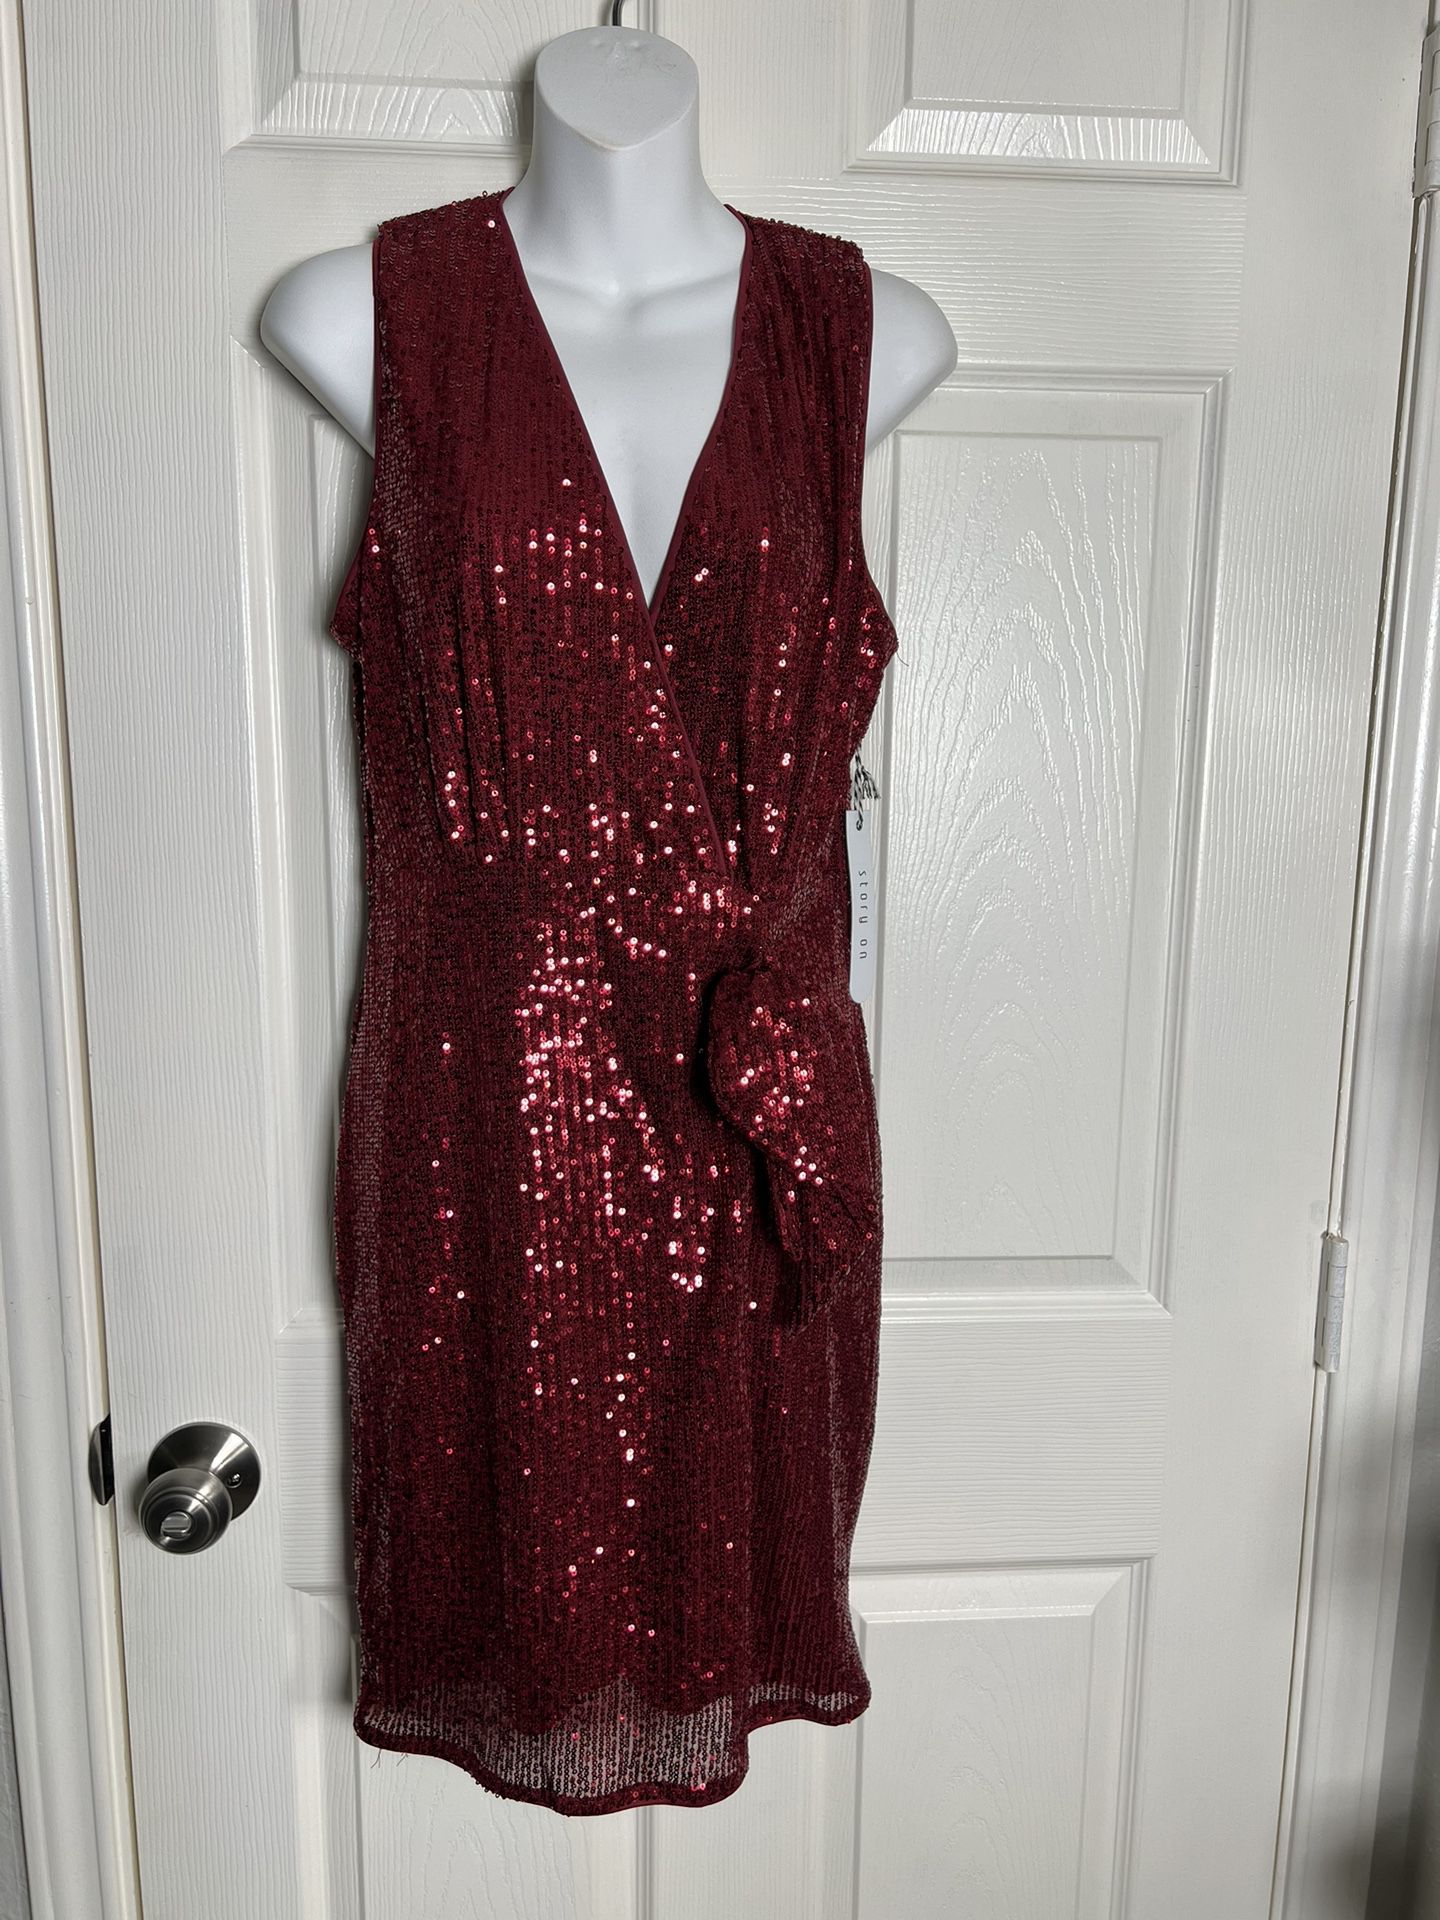 Maroon Sequined Cocktail Length Evening Dress